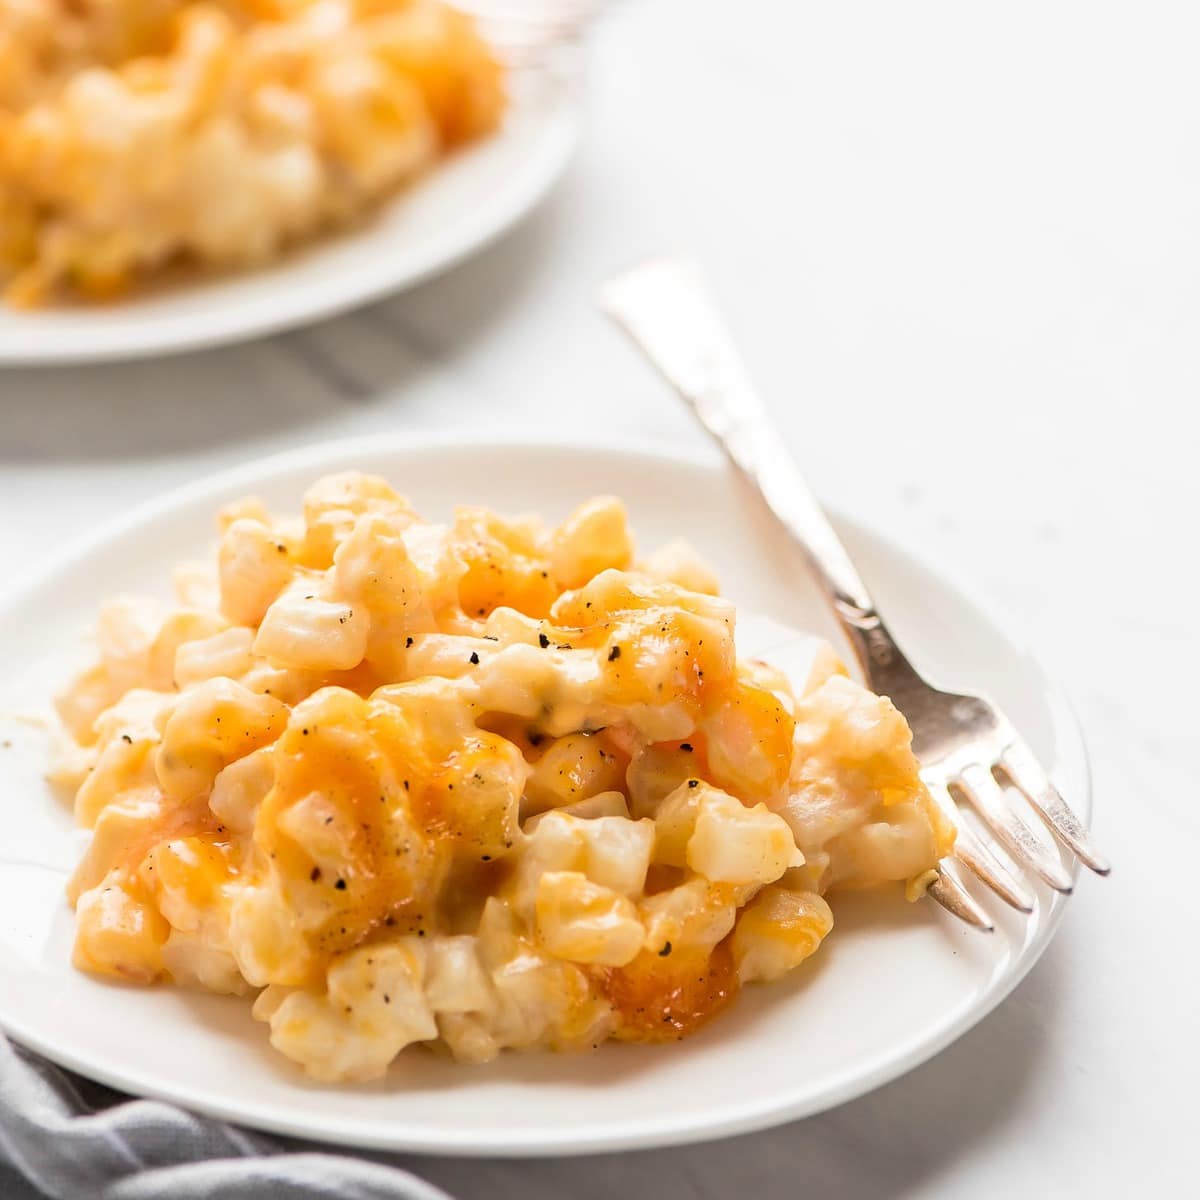 Thanksgiving side dishes - a plate full of crockpot cheesy potatoes.